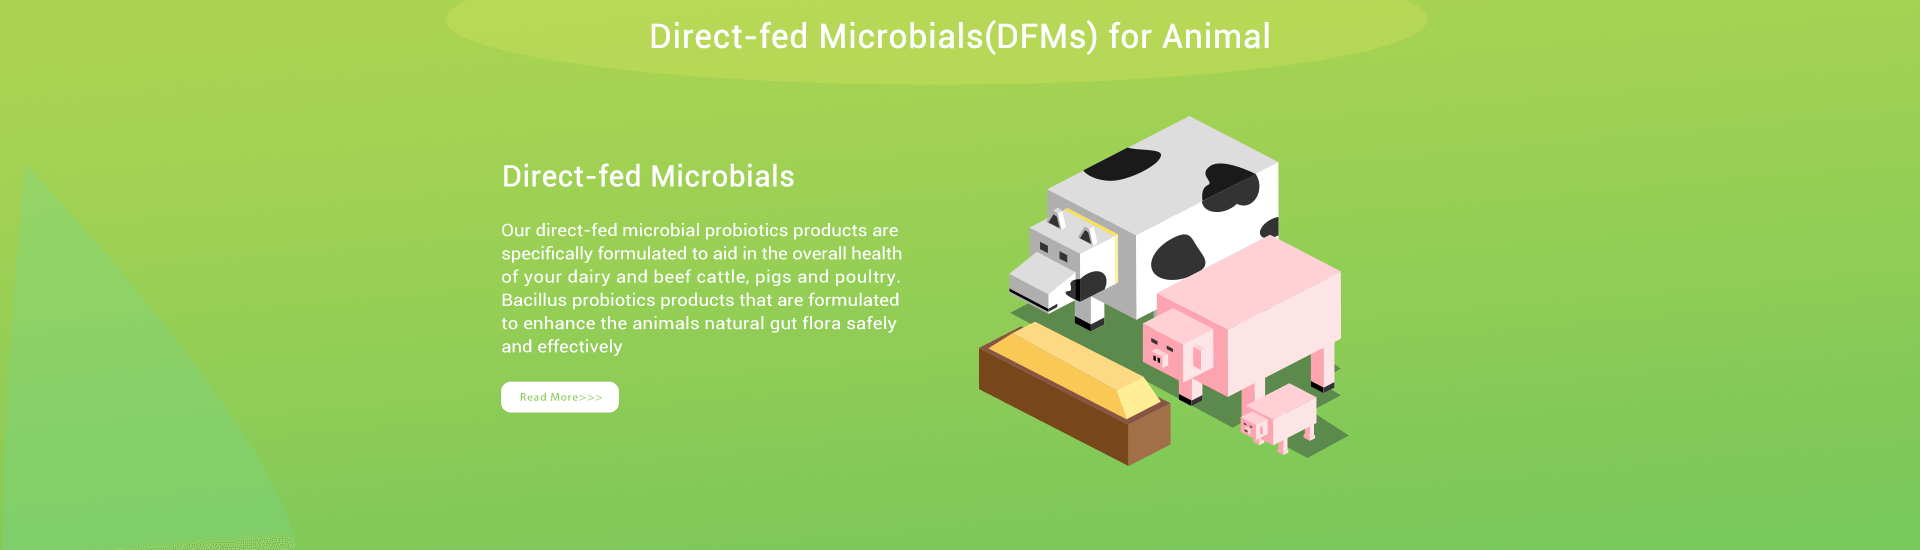 Direct-fed Microbials